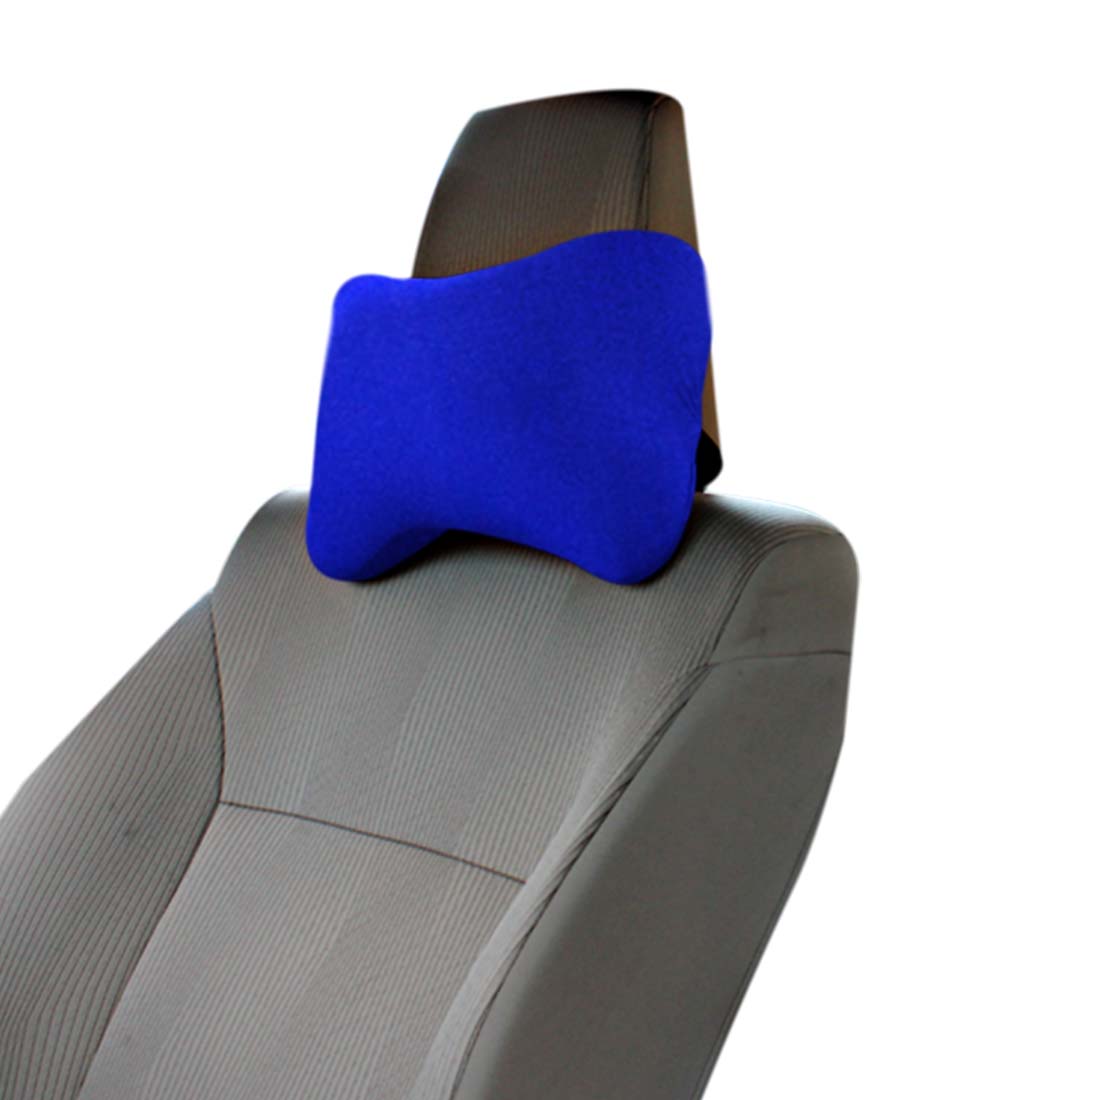 ORKA Classic Car Neckrest Pillow Filled With Microbeads [Pack Of 2] - Royal Blue  